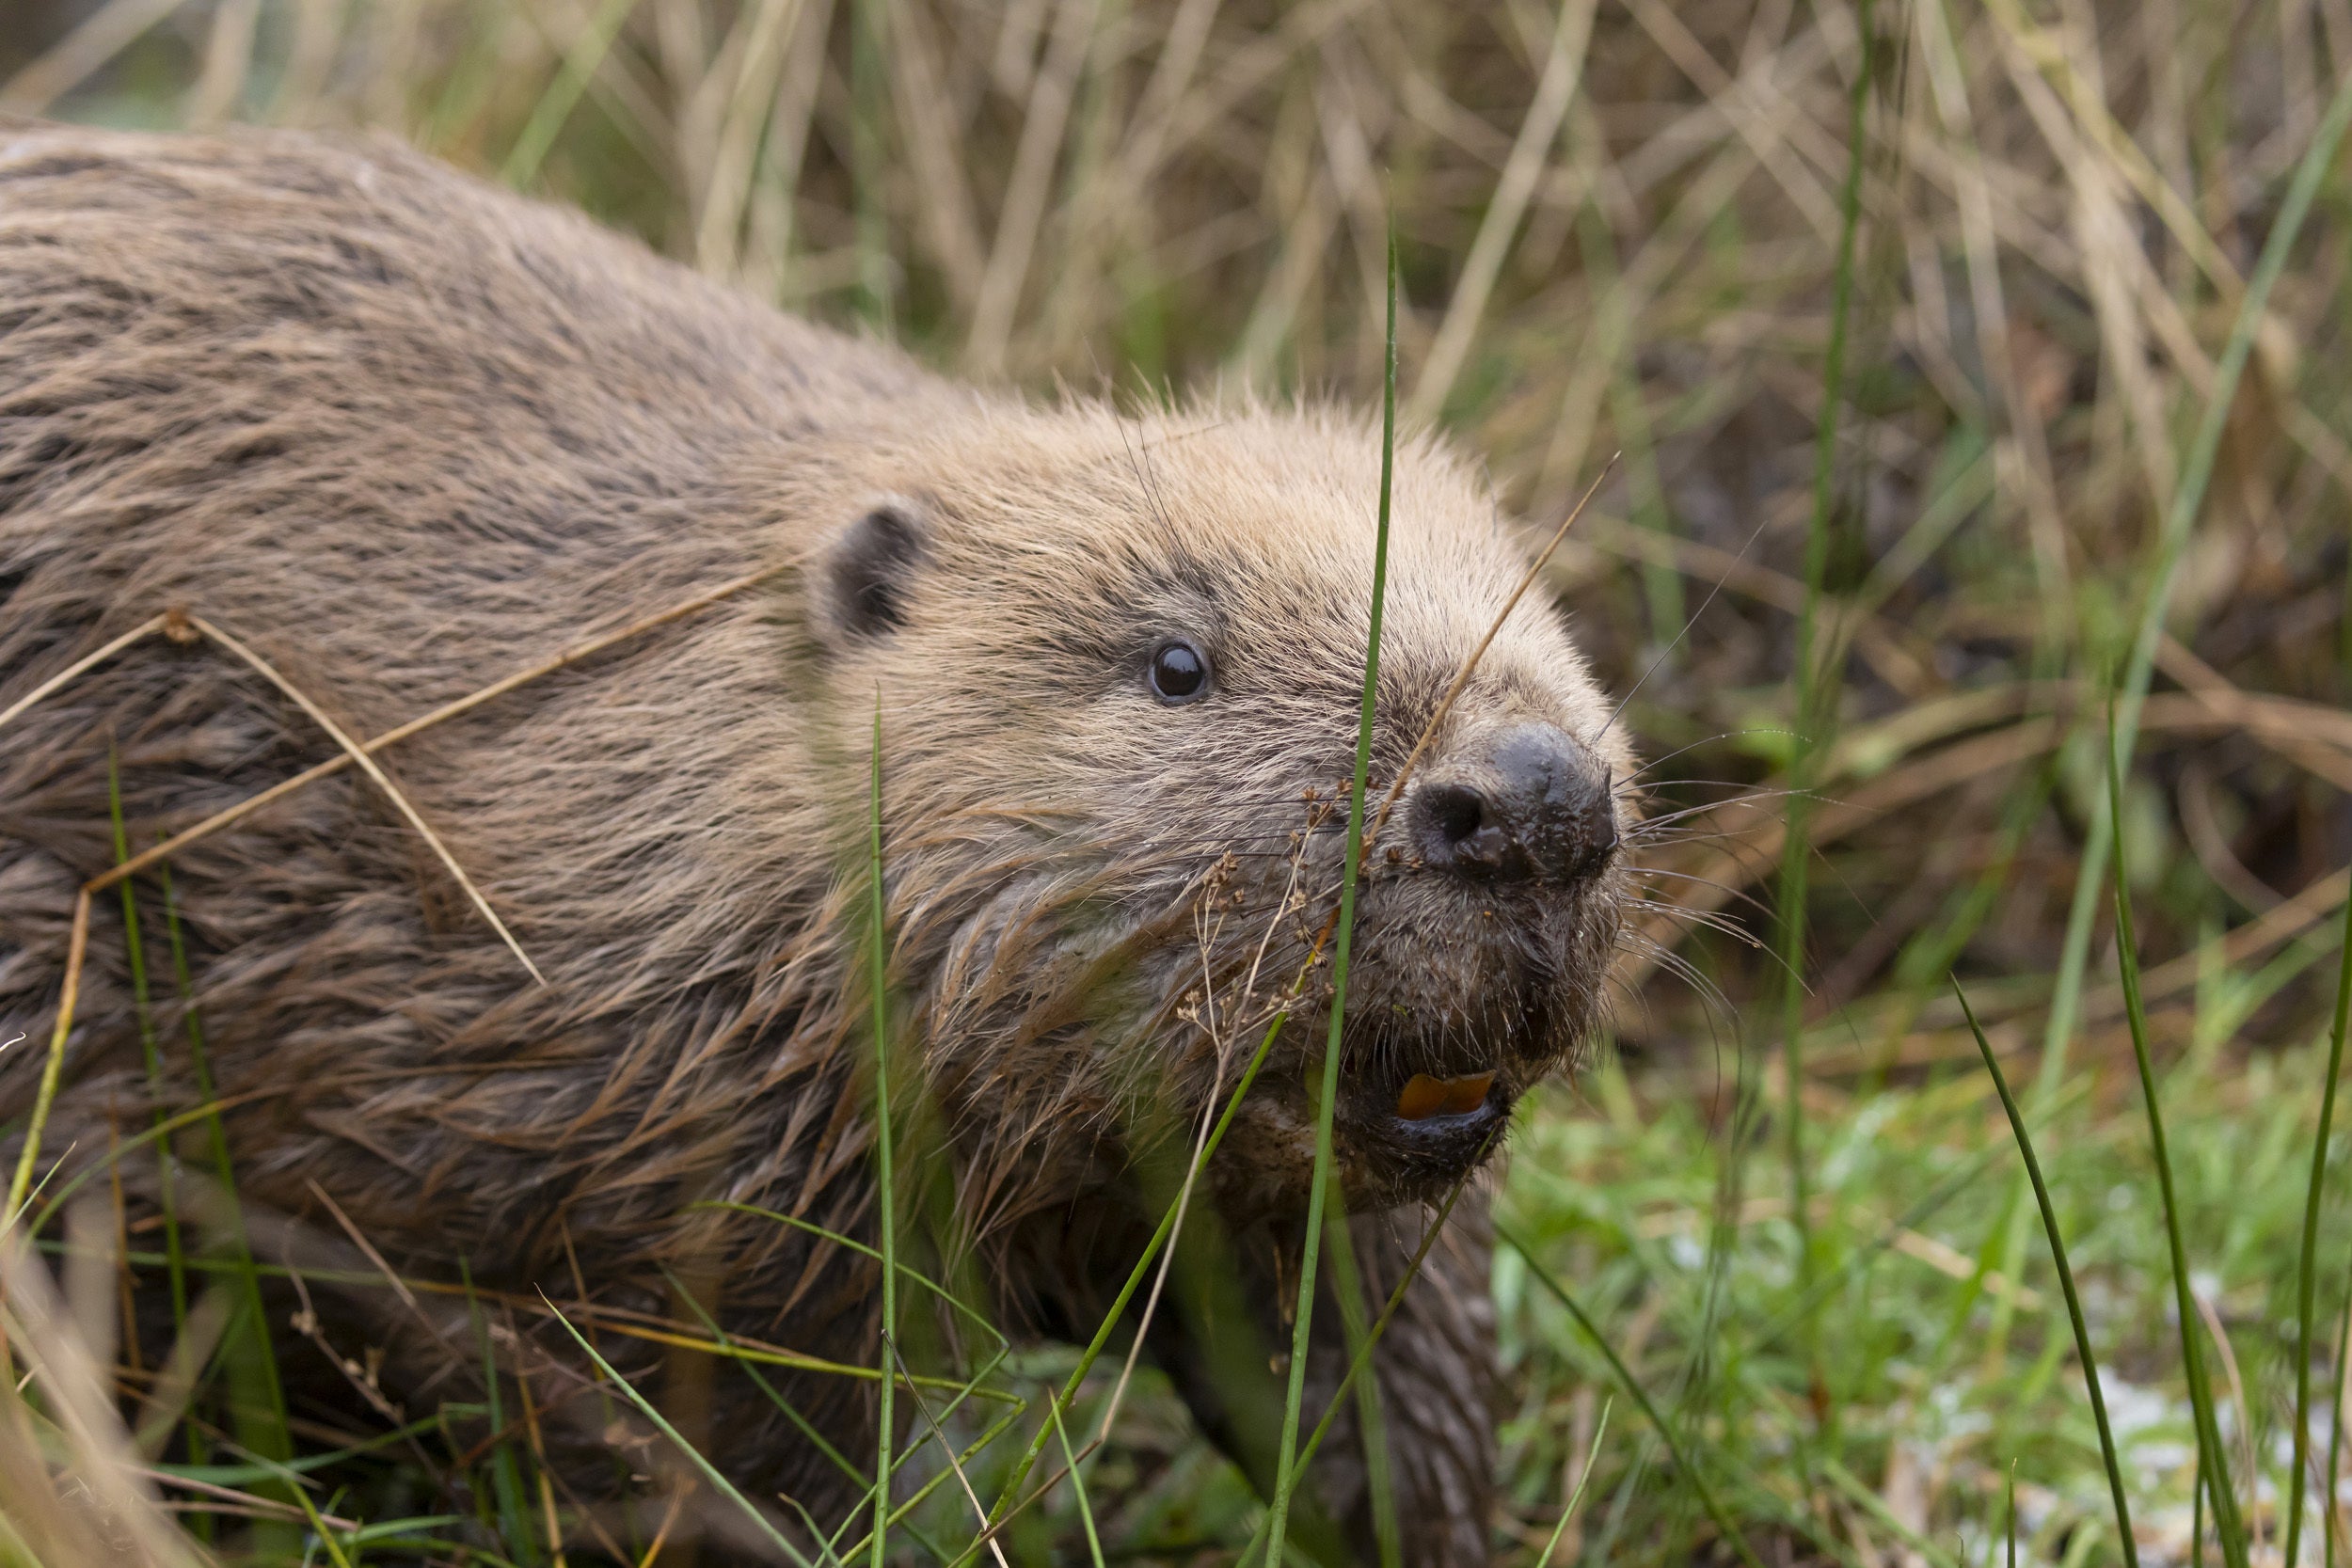 A second family of beavers have been translocated in Scotland in a bid to protect the species (Mark Hamblin/scotlandbigpicture.com)